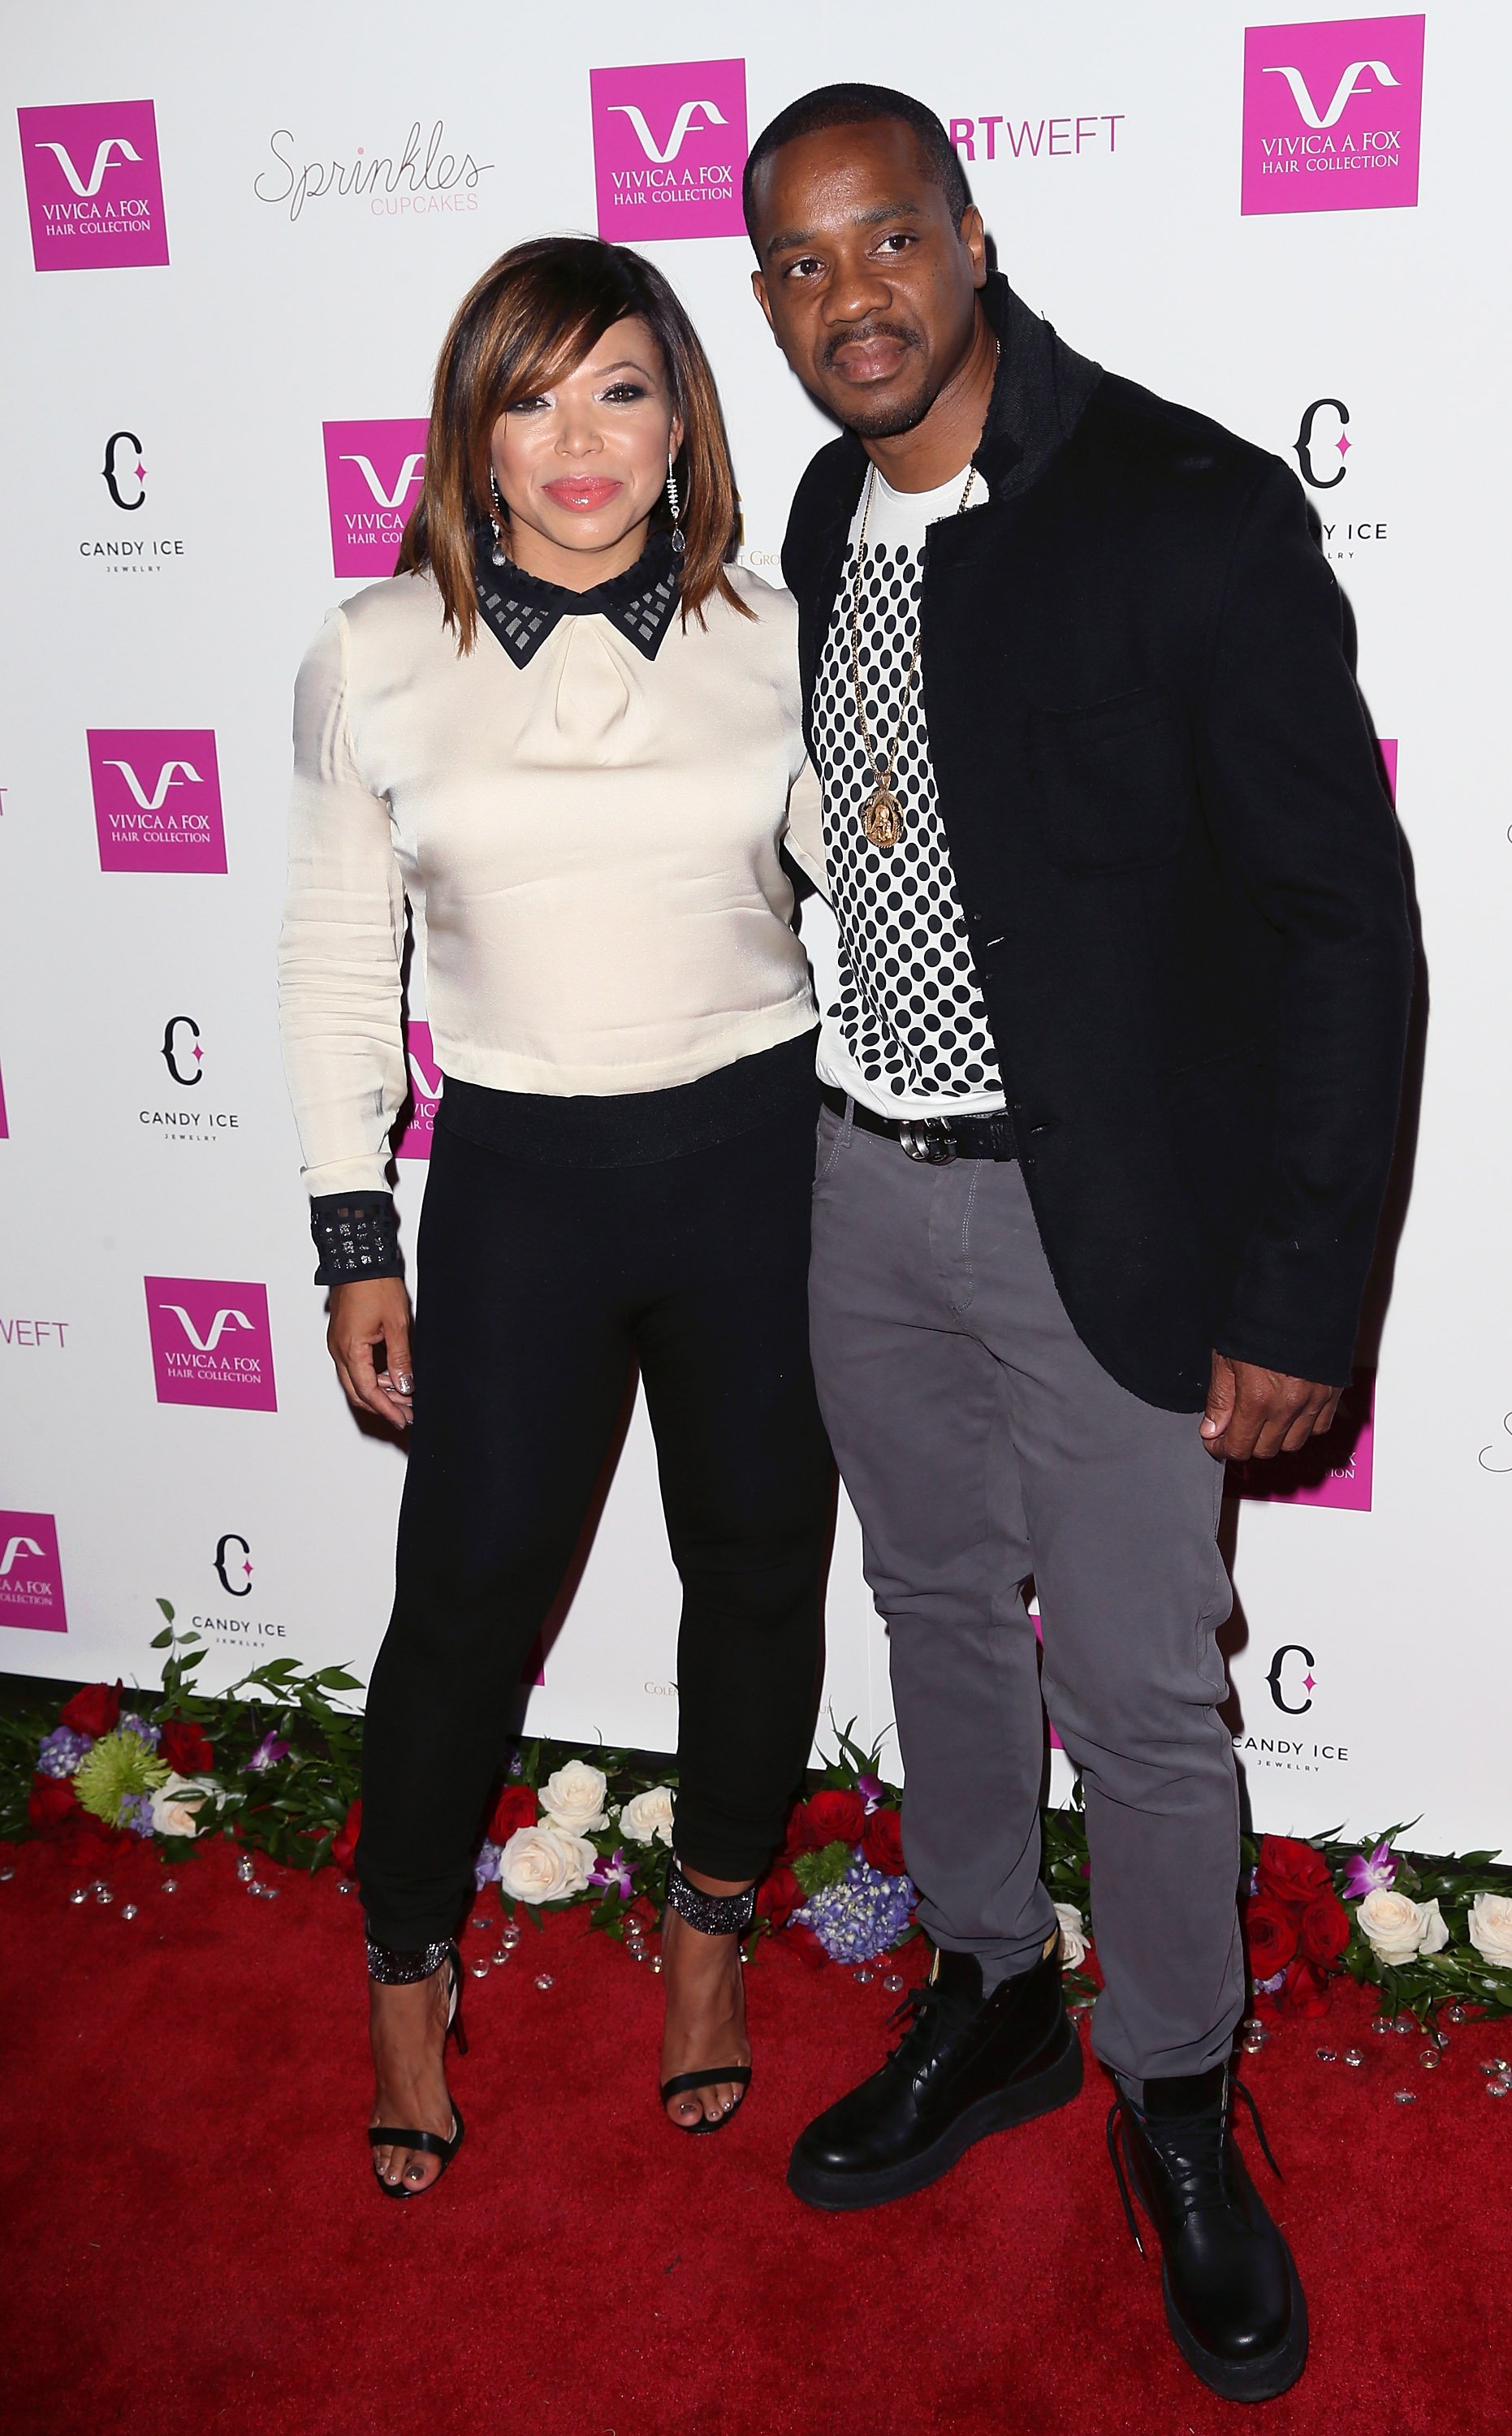 Tisha Campbell and Duane Martin at Vivica Fox's 5th birthday party in August 2014. | Photo: Getty Images